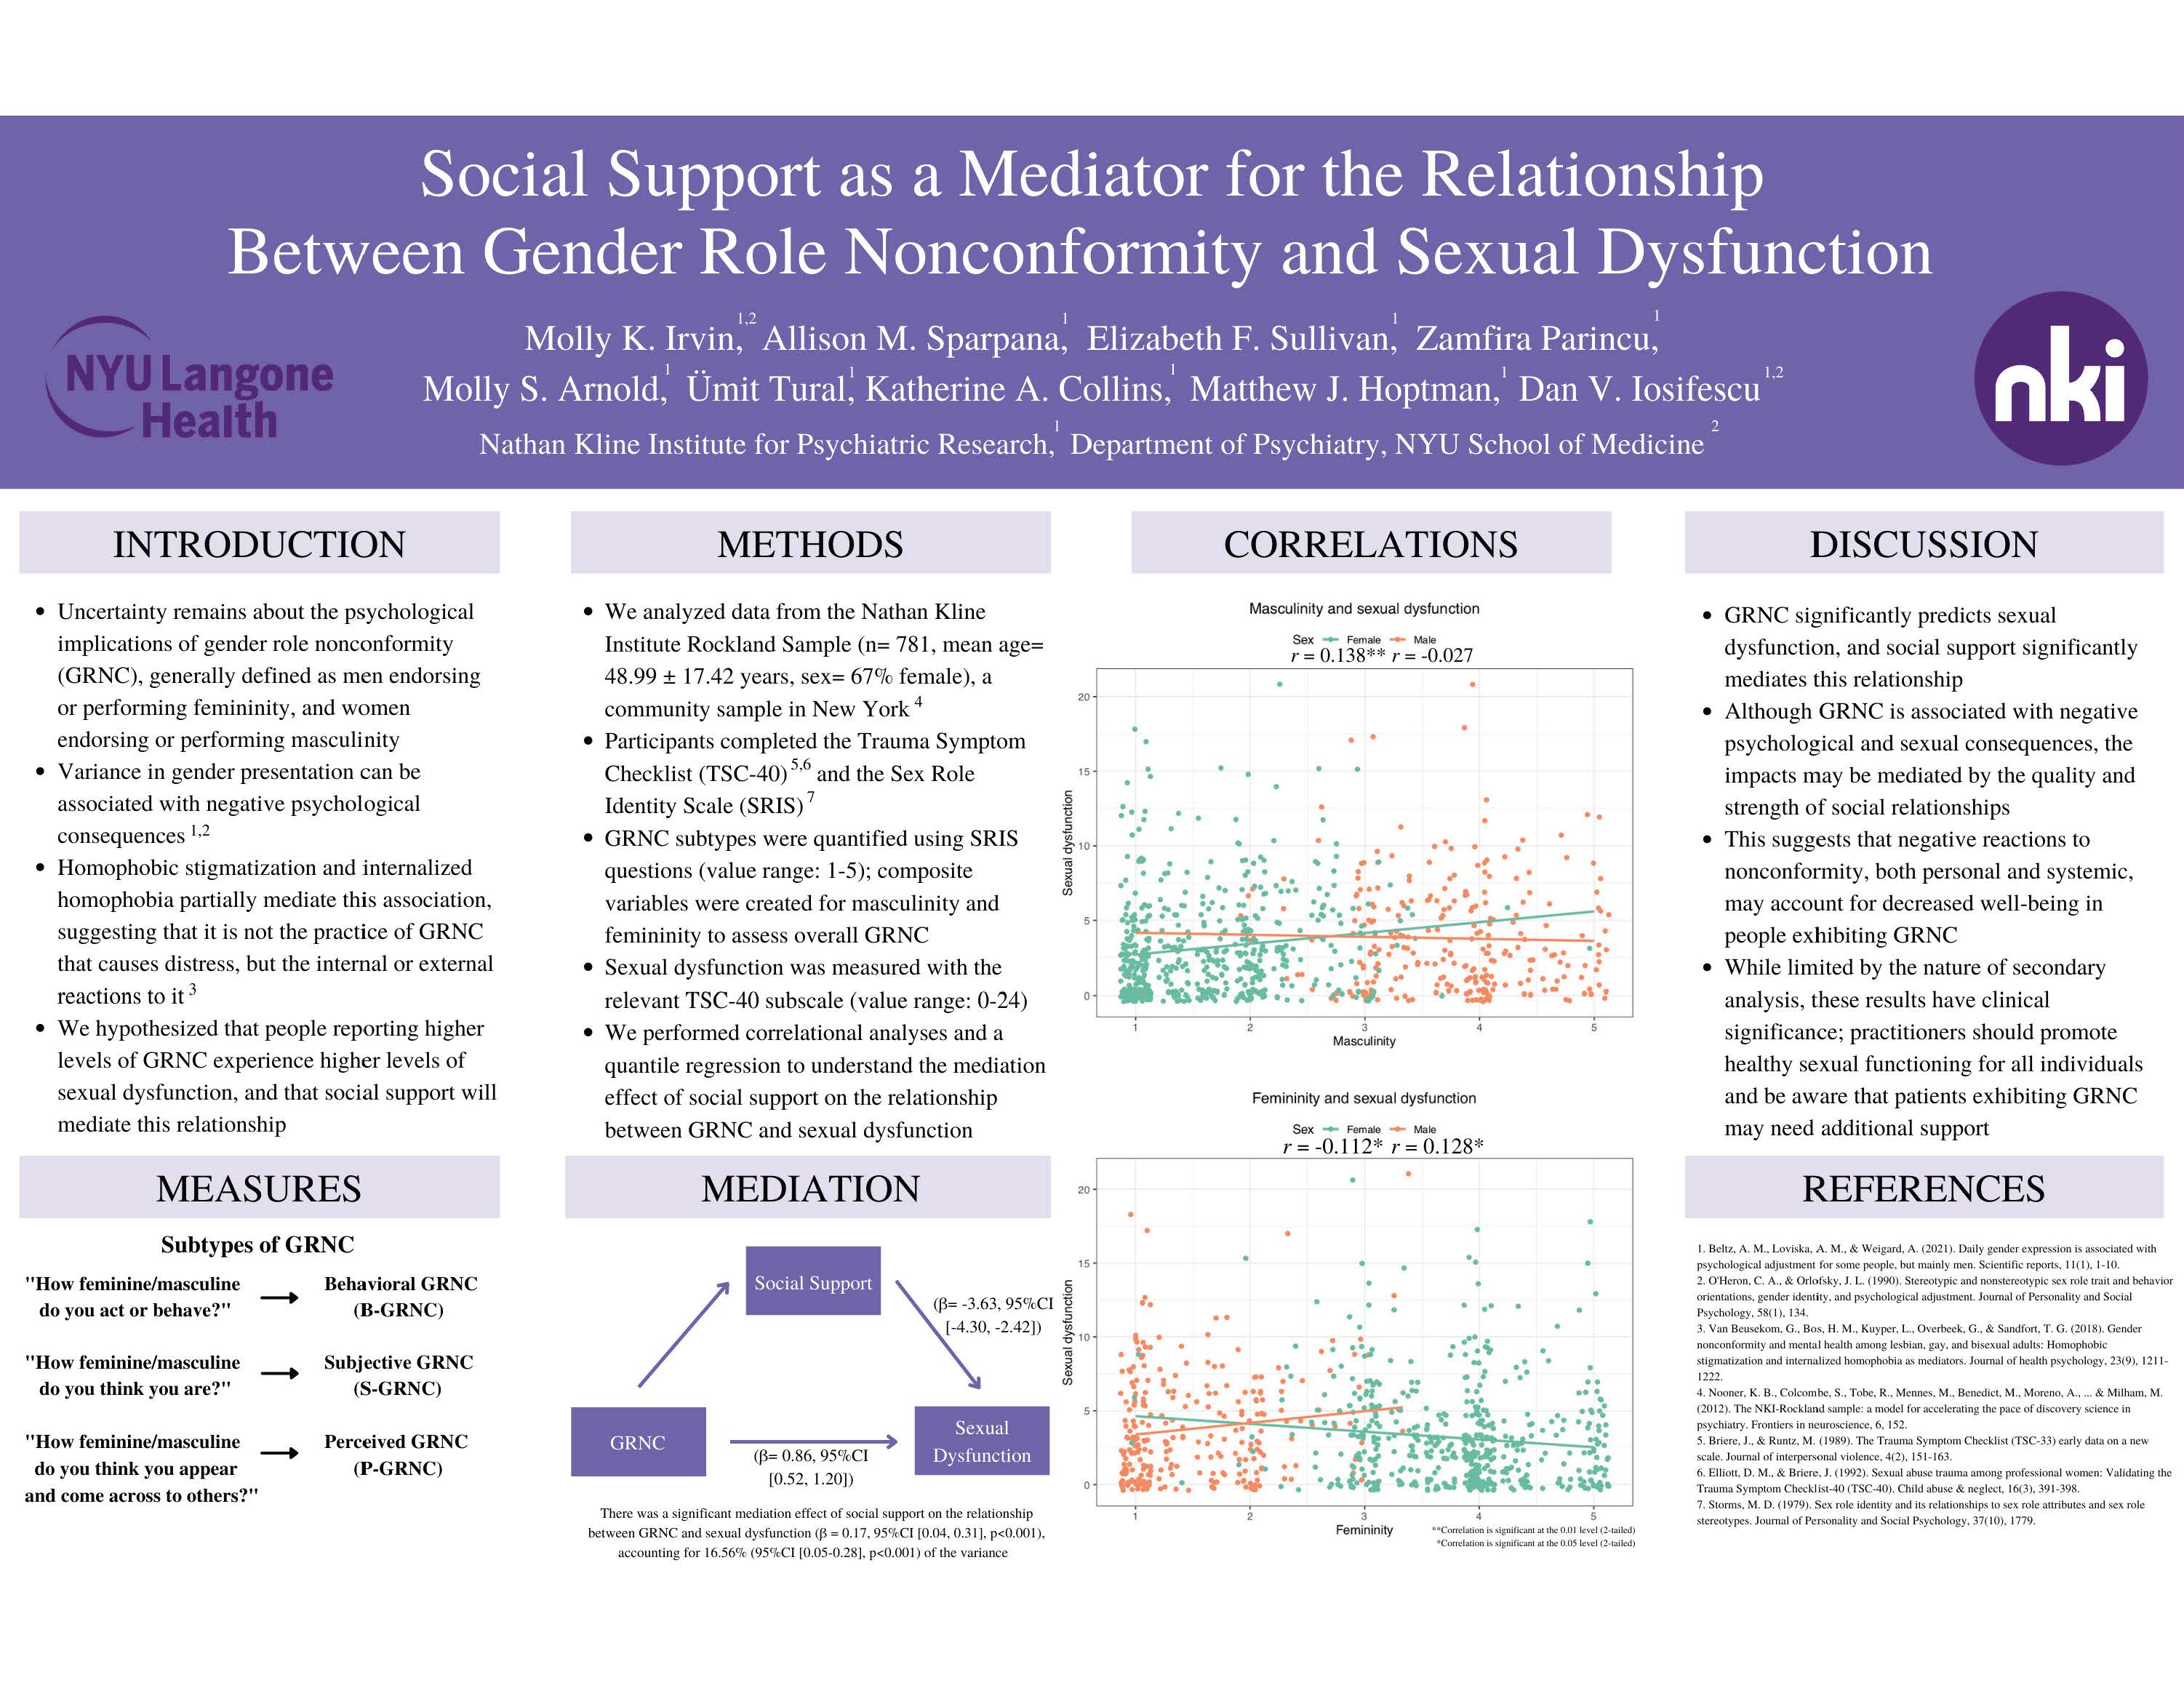 poster - Social Support as a Mediator for the Relationship Between Gender Role Noncomformity and Sexual Dysfunction